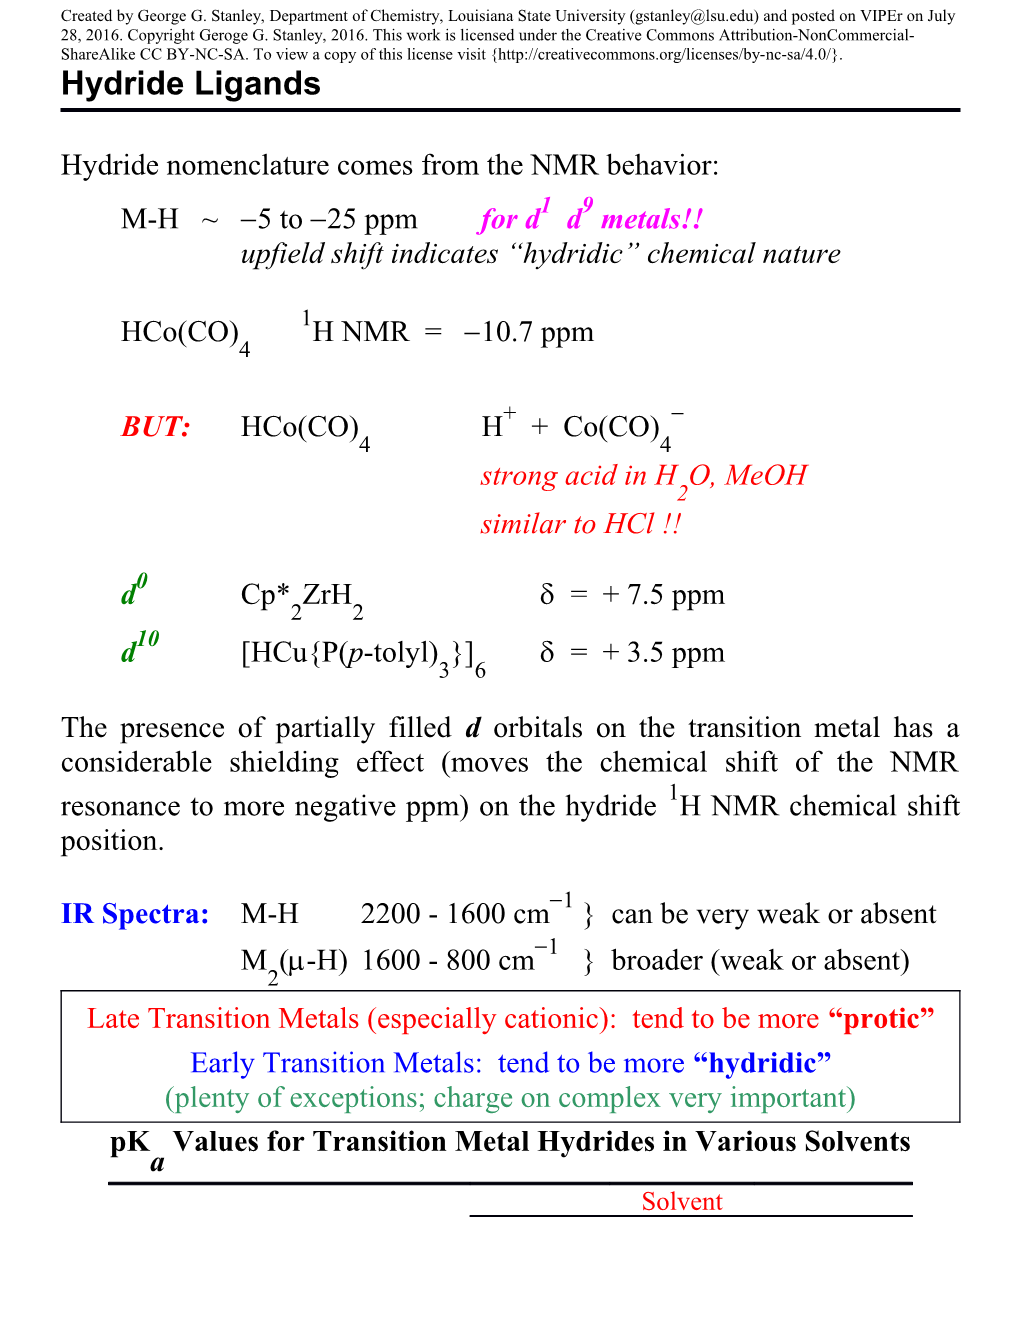 Hydride Nomenclature Comes from the NMR Behavior